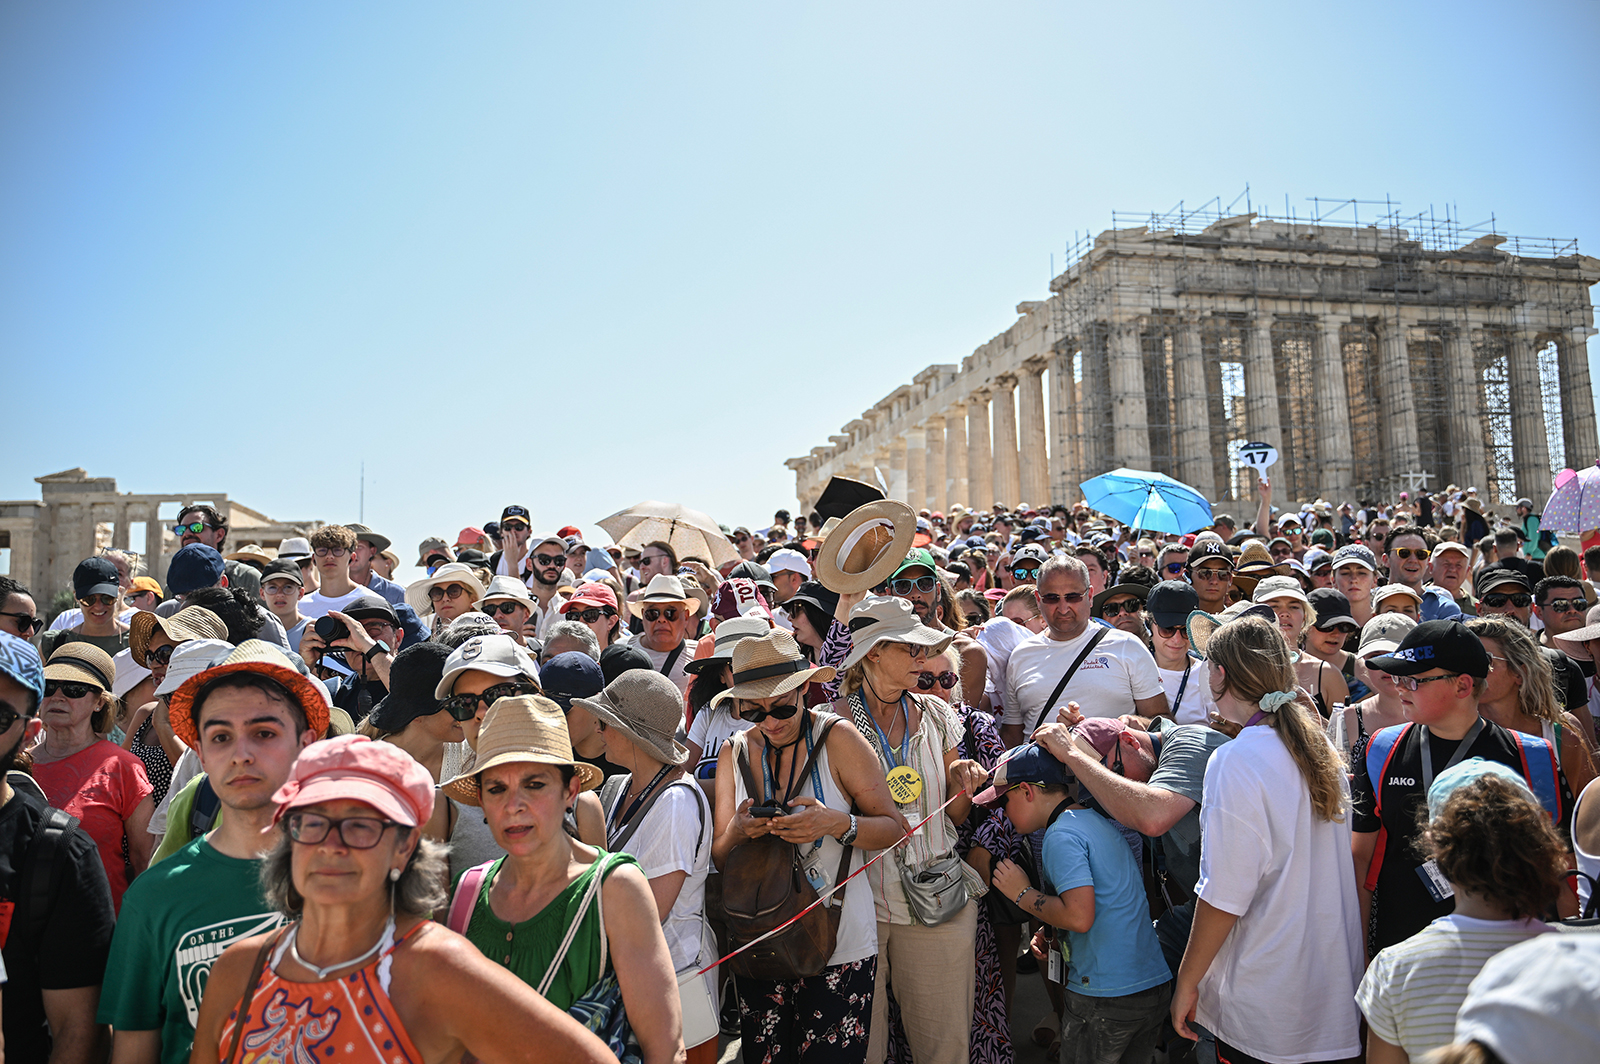 Tourists visit the Parthenon Temple during a hot day in Athen, Greece, on July 14.